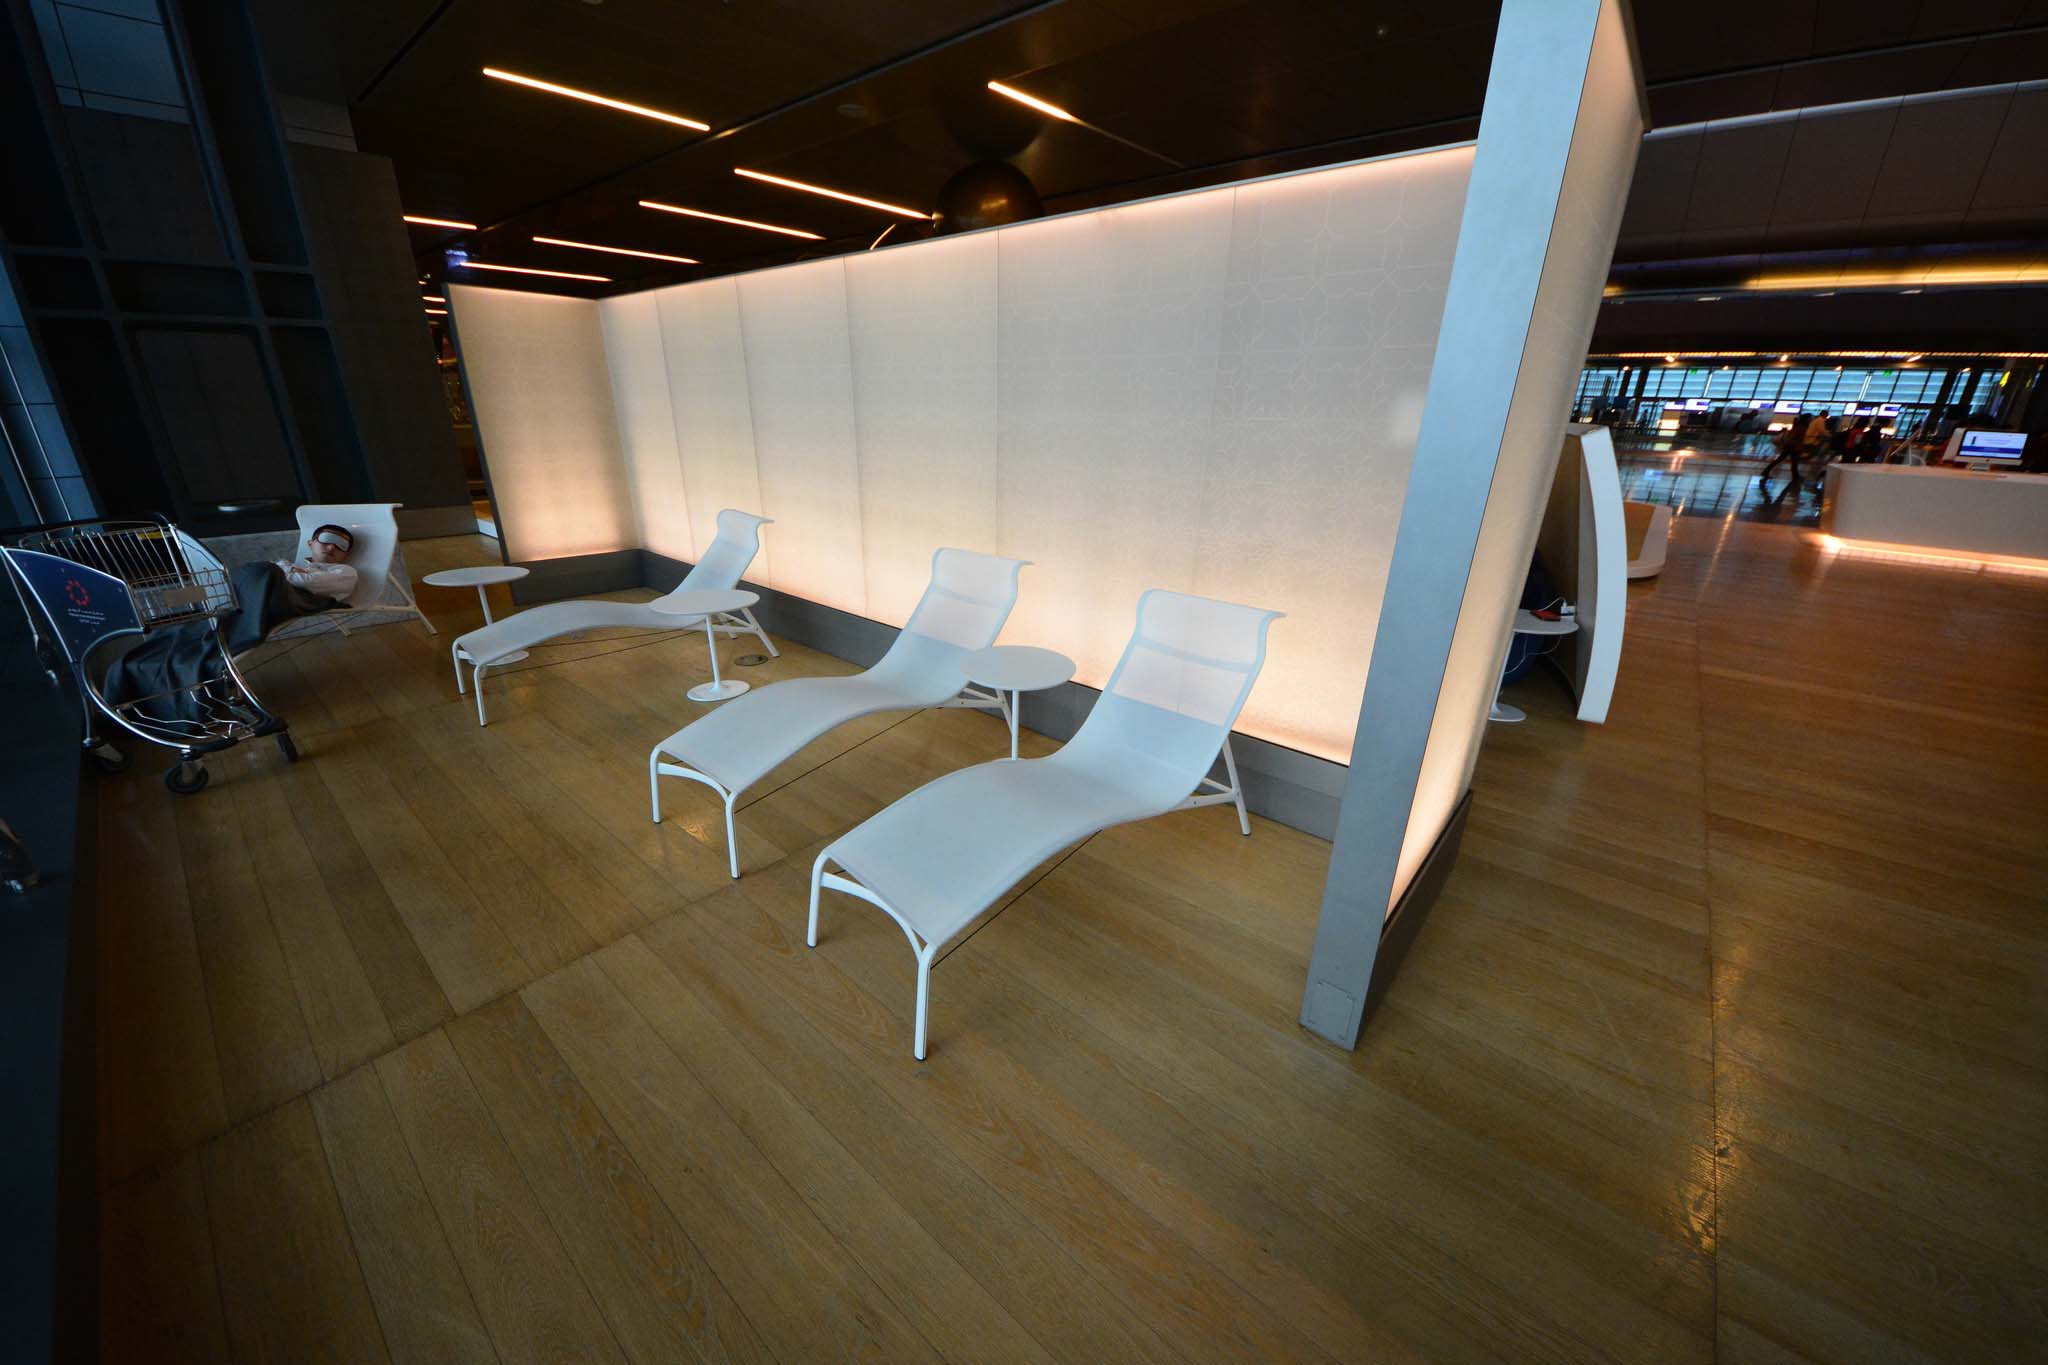 A rest area at Hamad International Airport